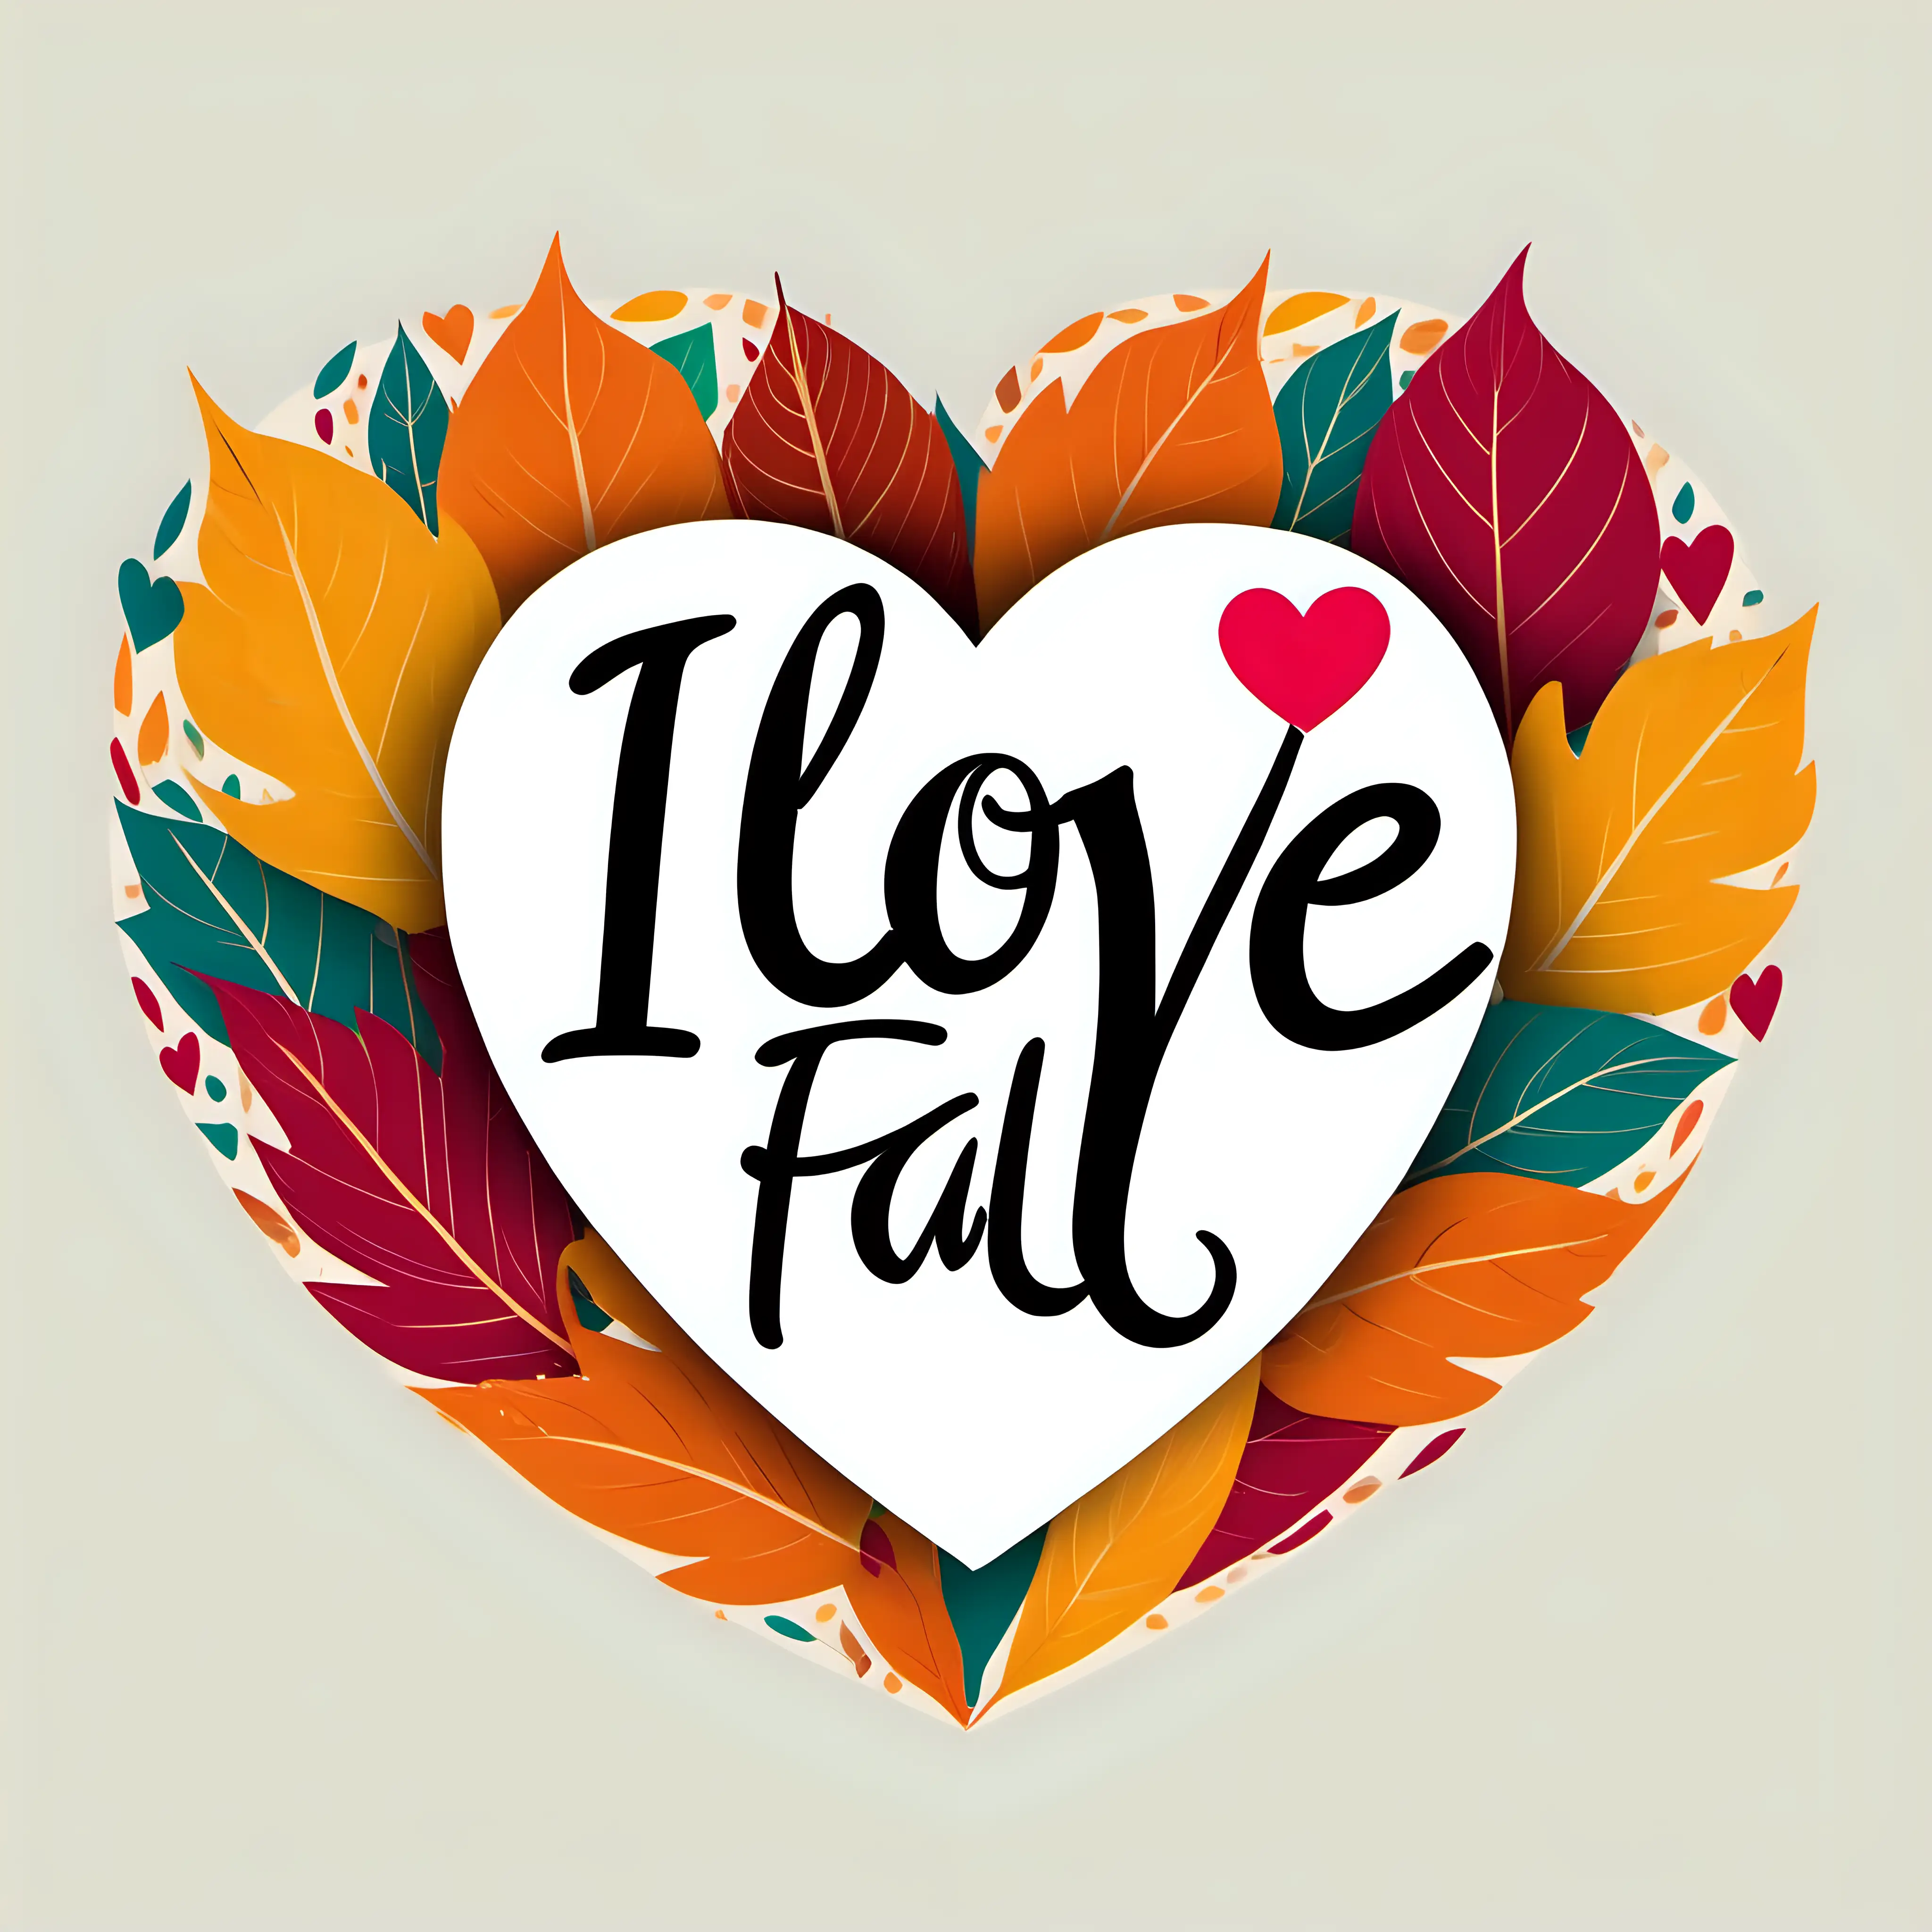 a simple vector are that says "I love Fall" with a fancy script font in the shape of a heart with colorful leaves on a white background, poster, typeography